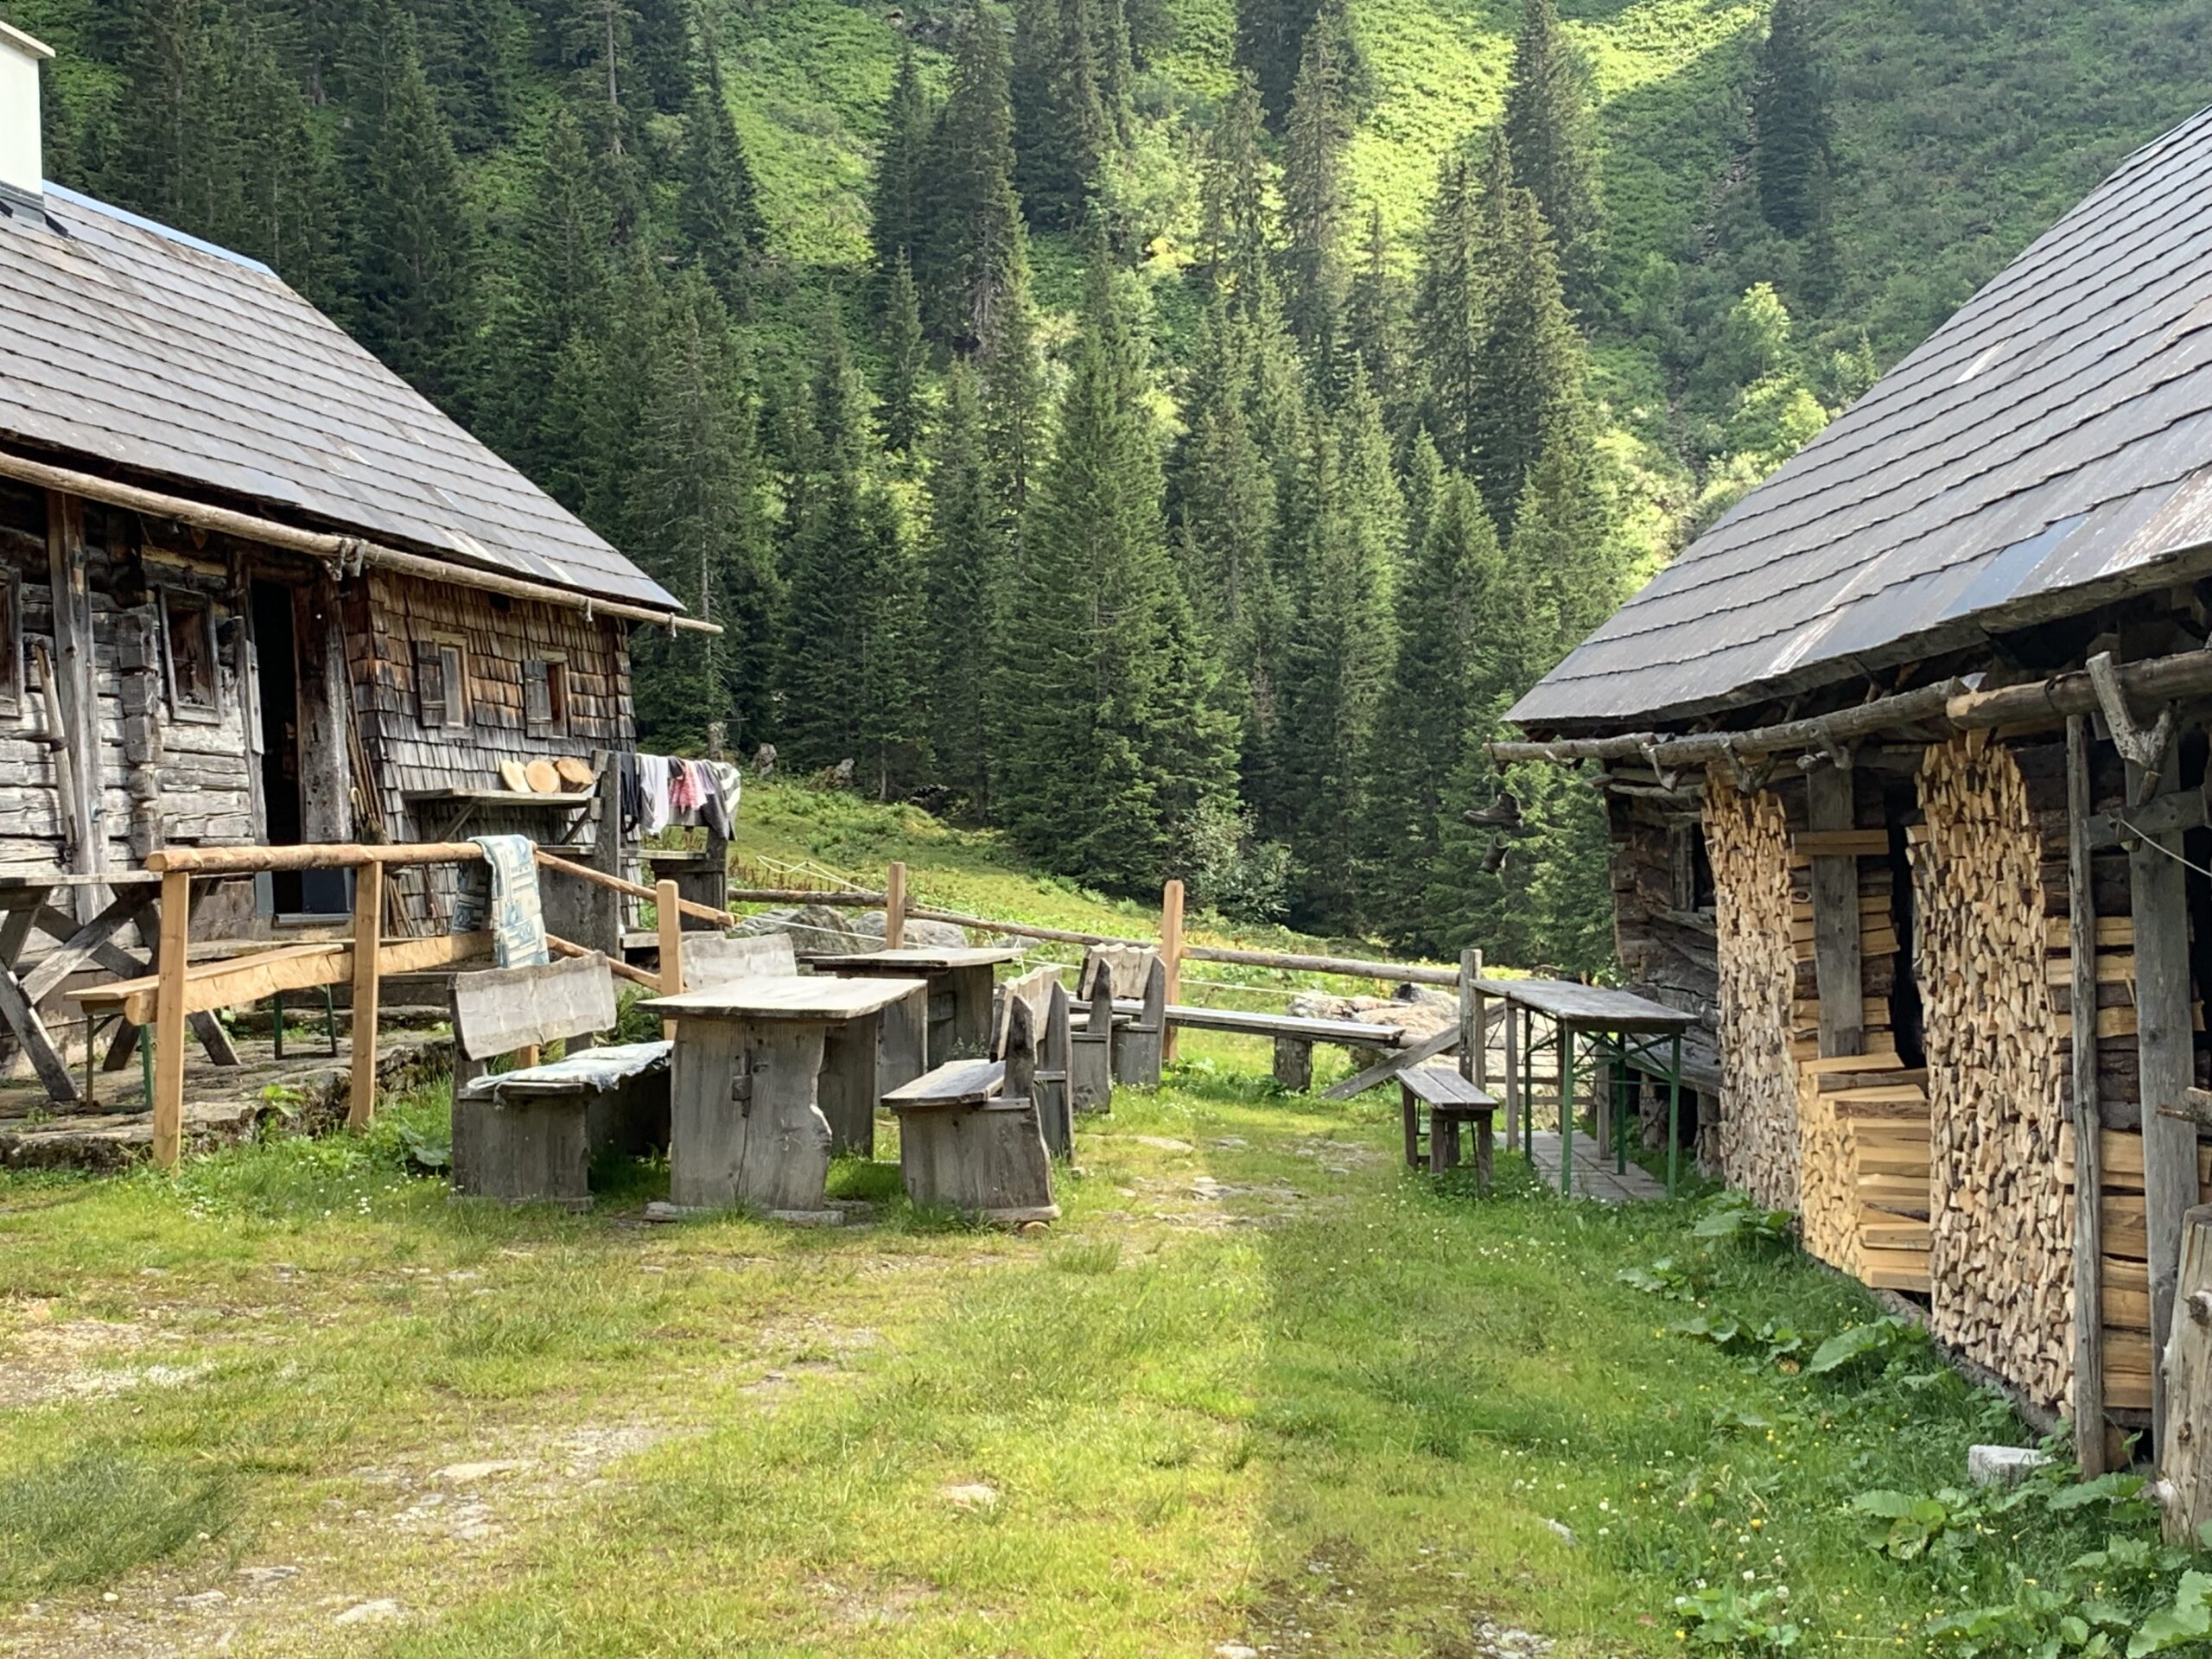 Finsterkaralm, a lovely rest stop on the hike departing from Haus Erna last summer holiday.